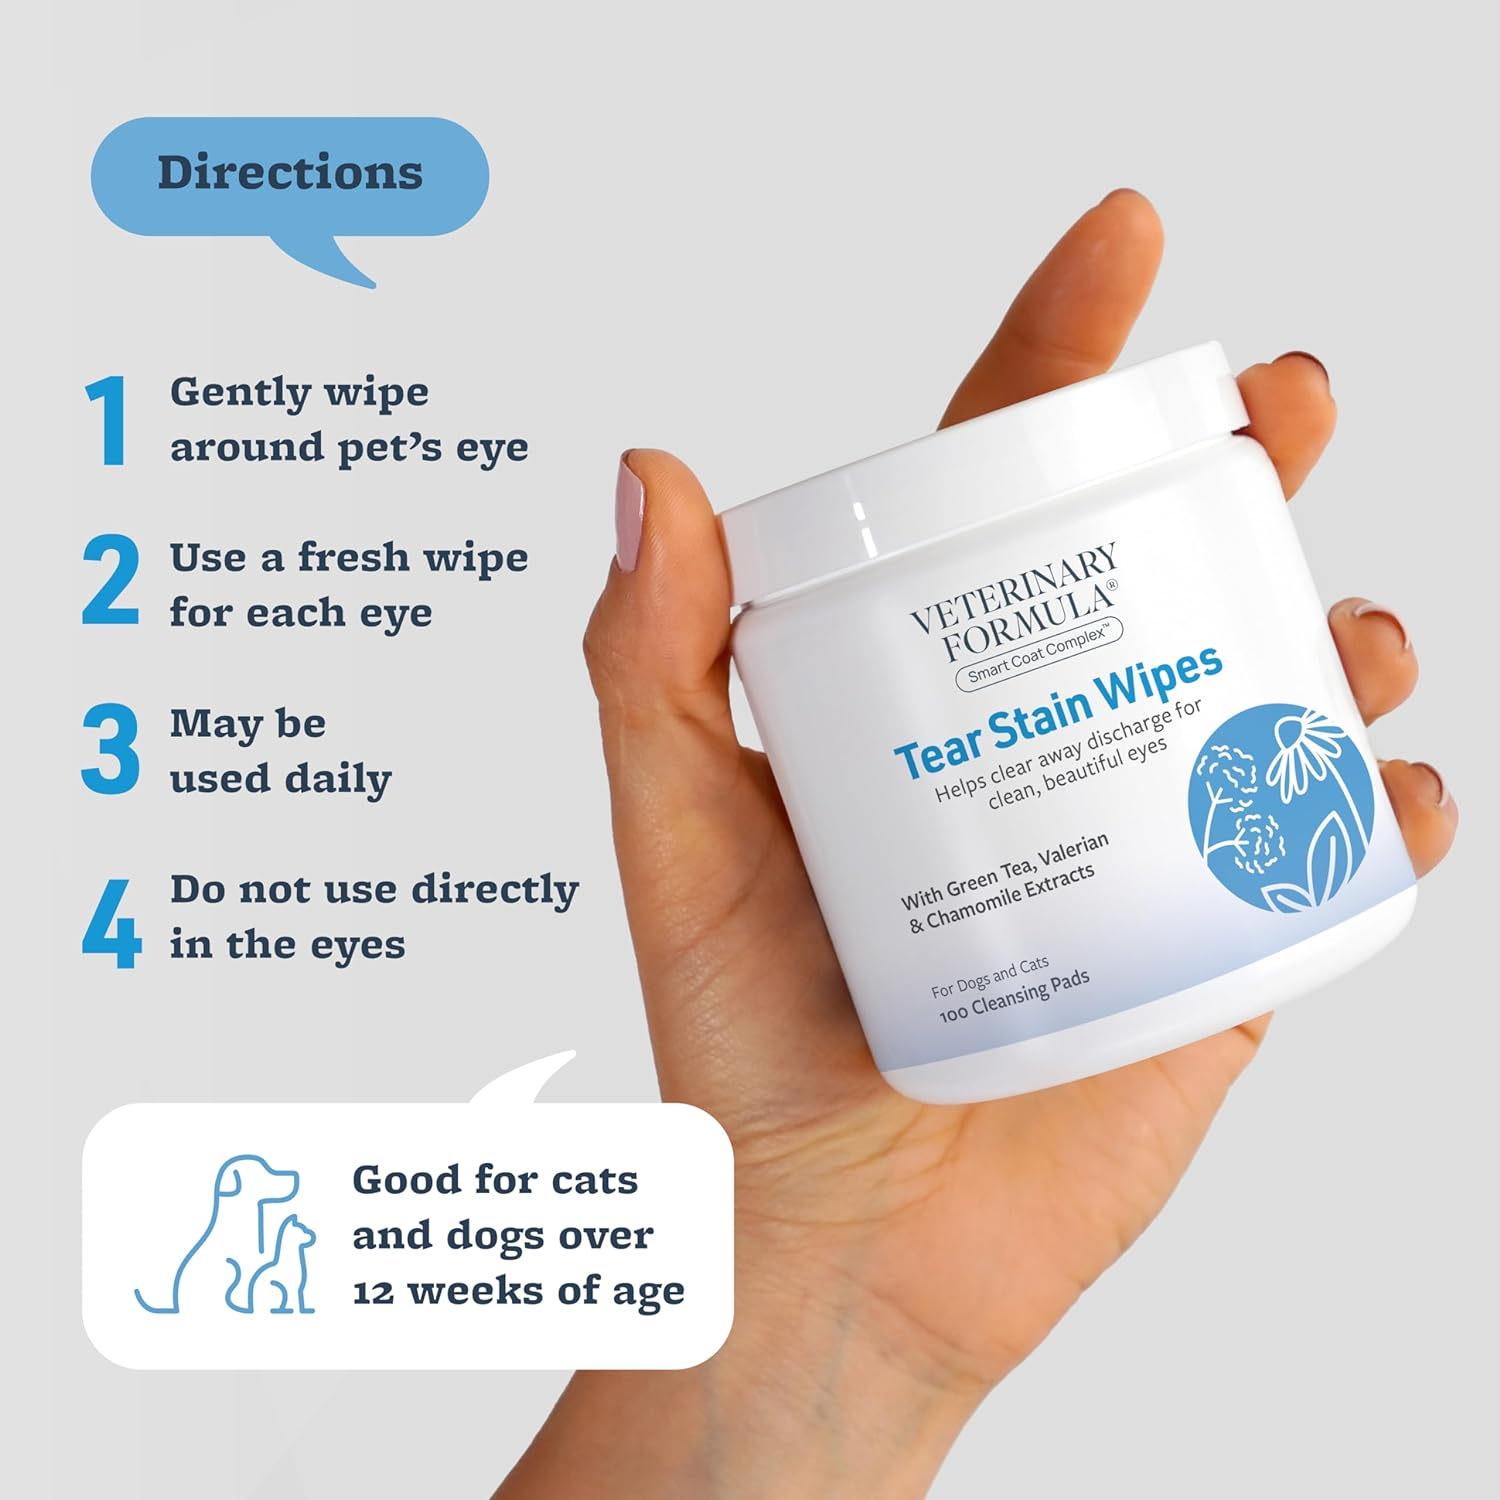 Veterinary Formula Smart Coat Complex Tear Stain Wipes for Dogs & Cats, 100 ct – Gently Wipe Away Debris and Clean Stains Around The Eyes of Pets, Fragrance-Free and Pre-Saturated : Everything Else